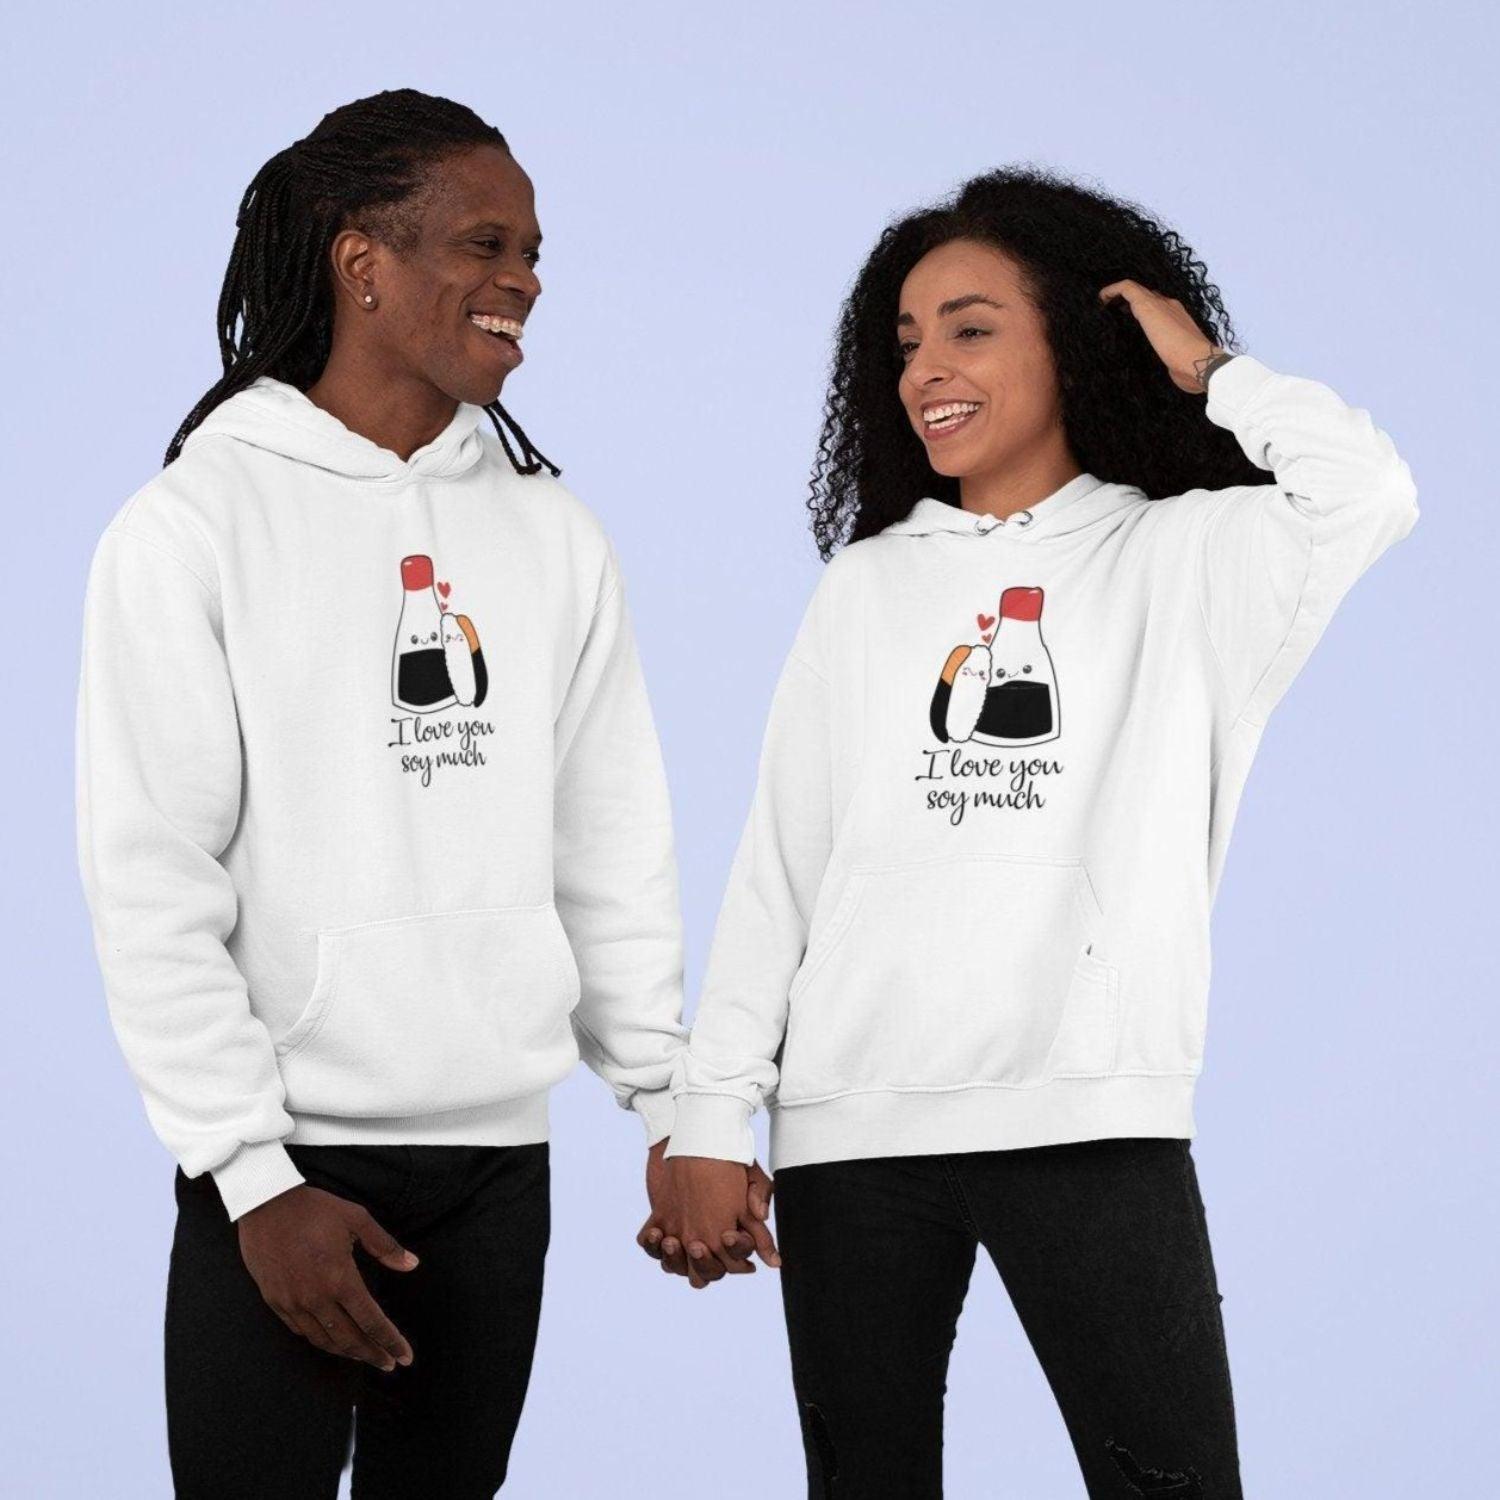 I Love You Soy Much Matching Outfits - Perfect for Food Lovers & Casual Style Enthusiasts - 4Lovebirds